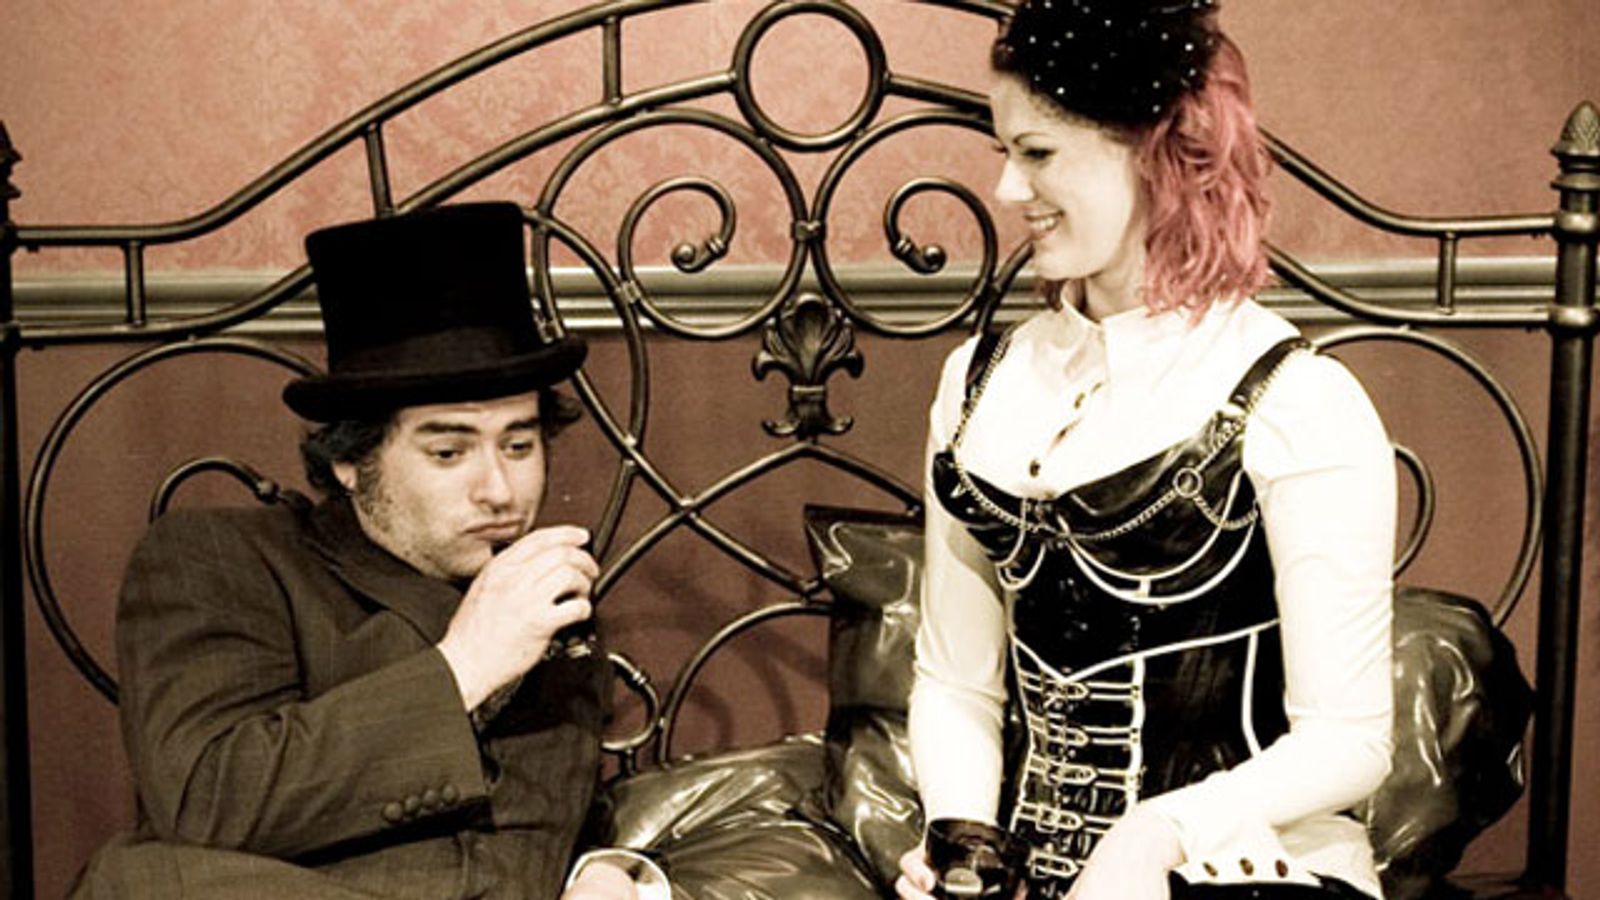 Soma Snakeoil and Fat Mike Bringing Fetish Filth to AEE